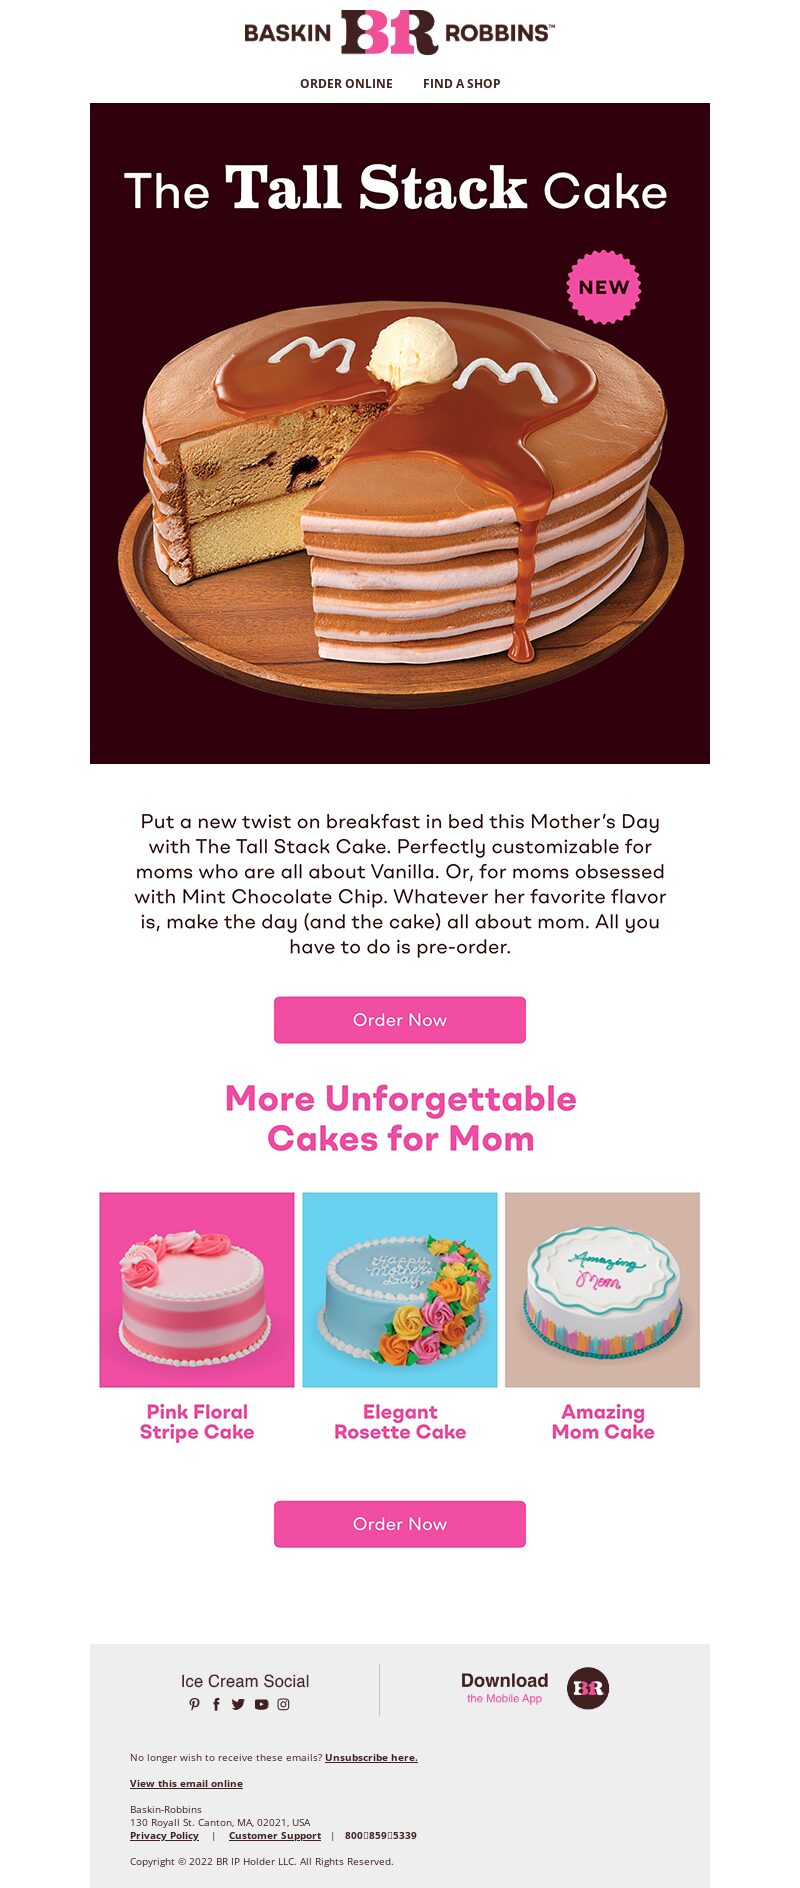 Baskin Robbins' Mother's Day email marketing campaign.